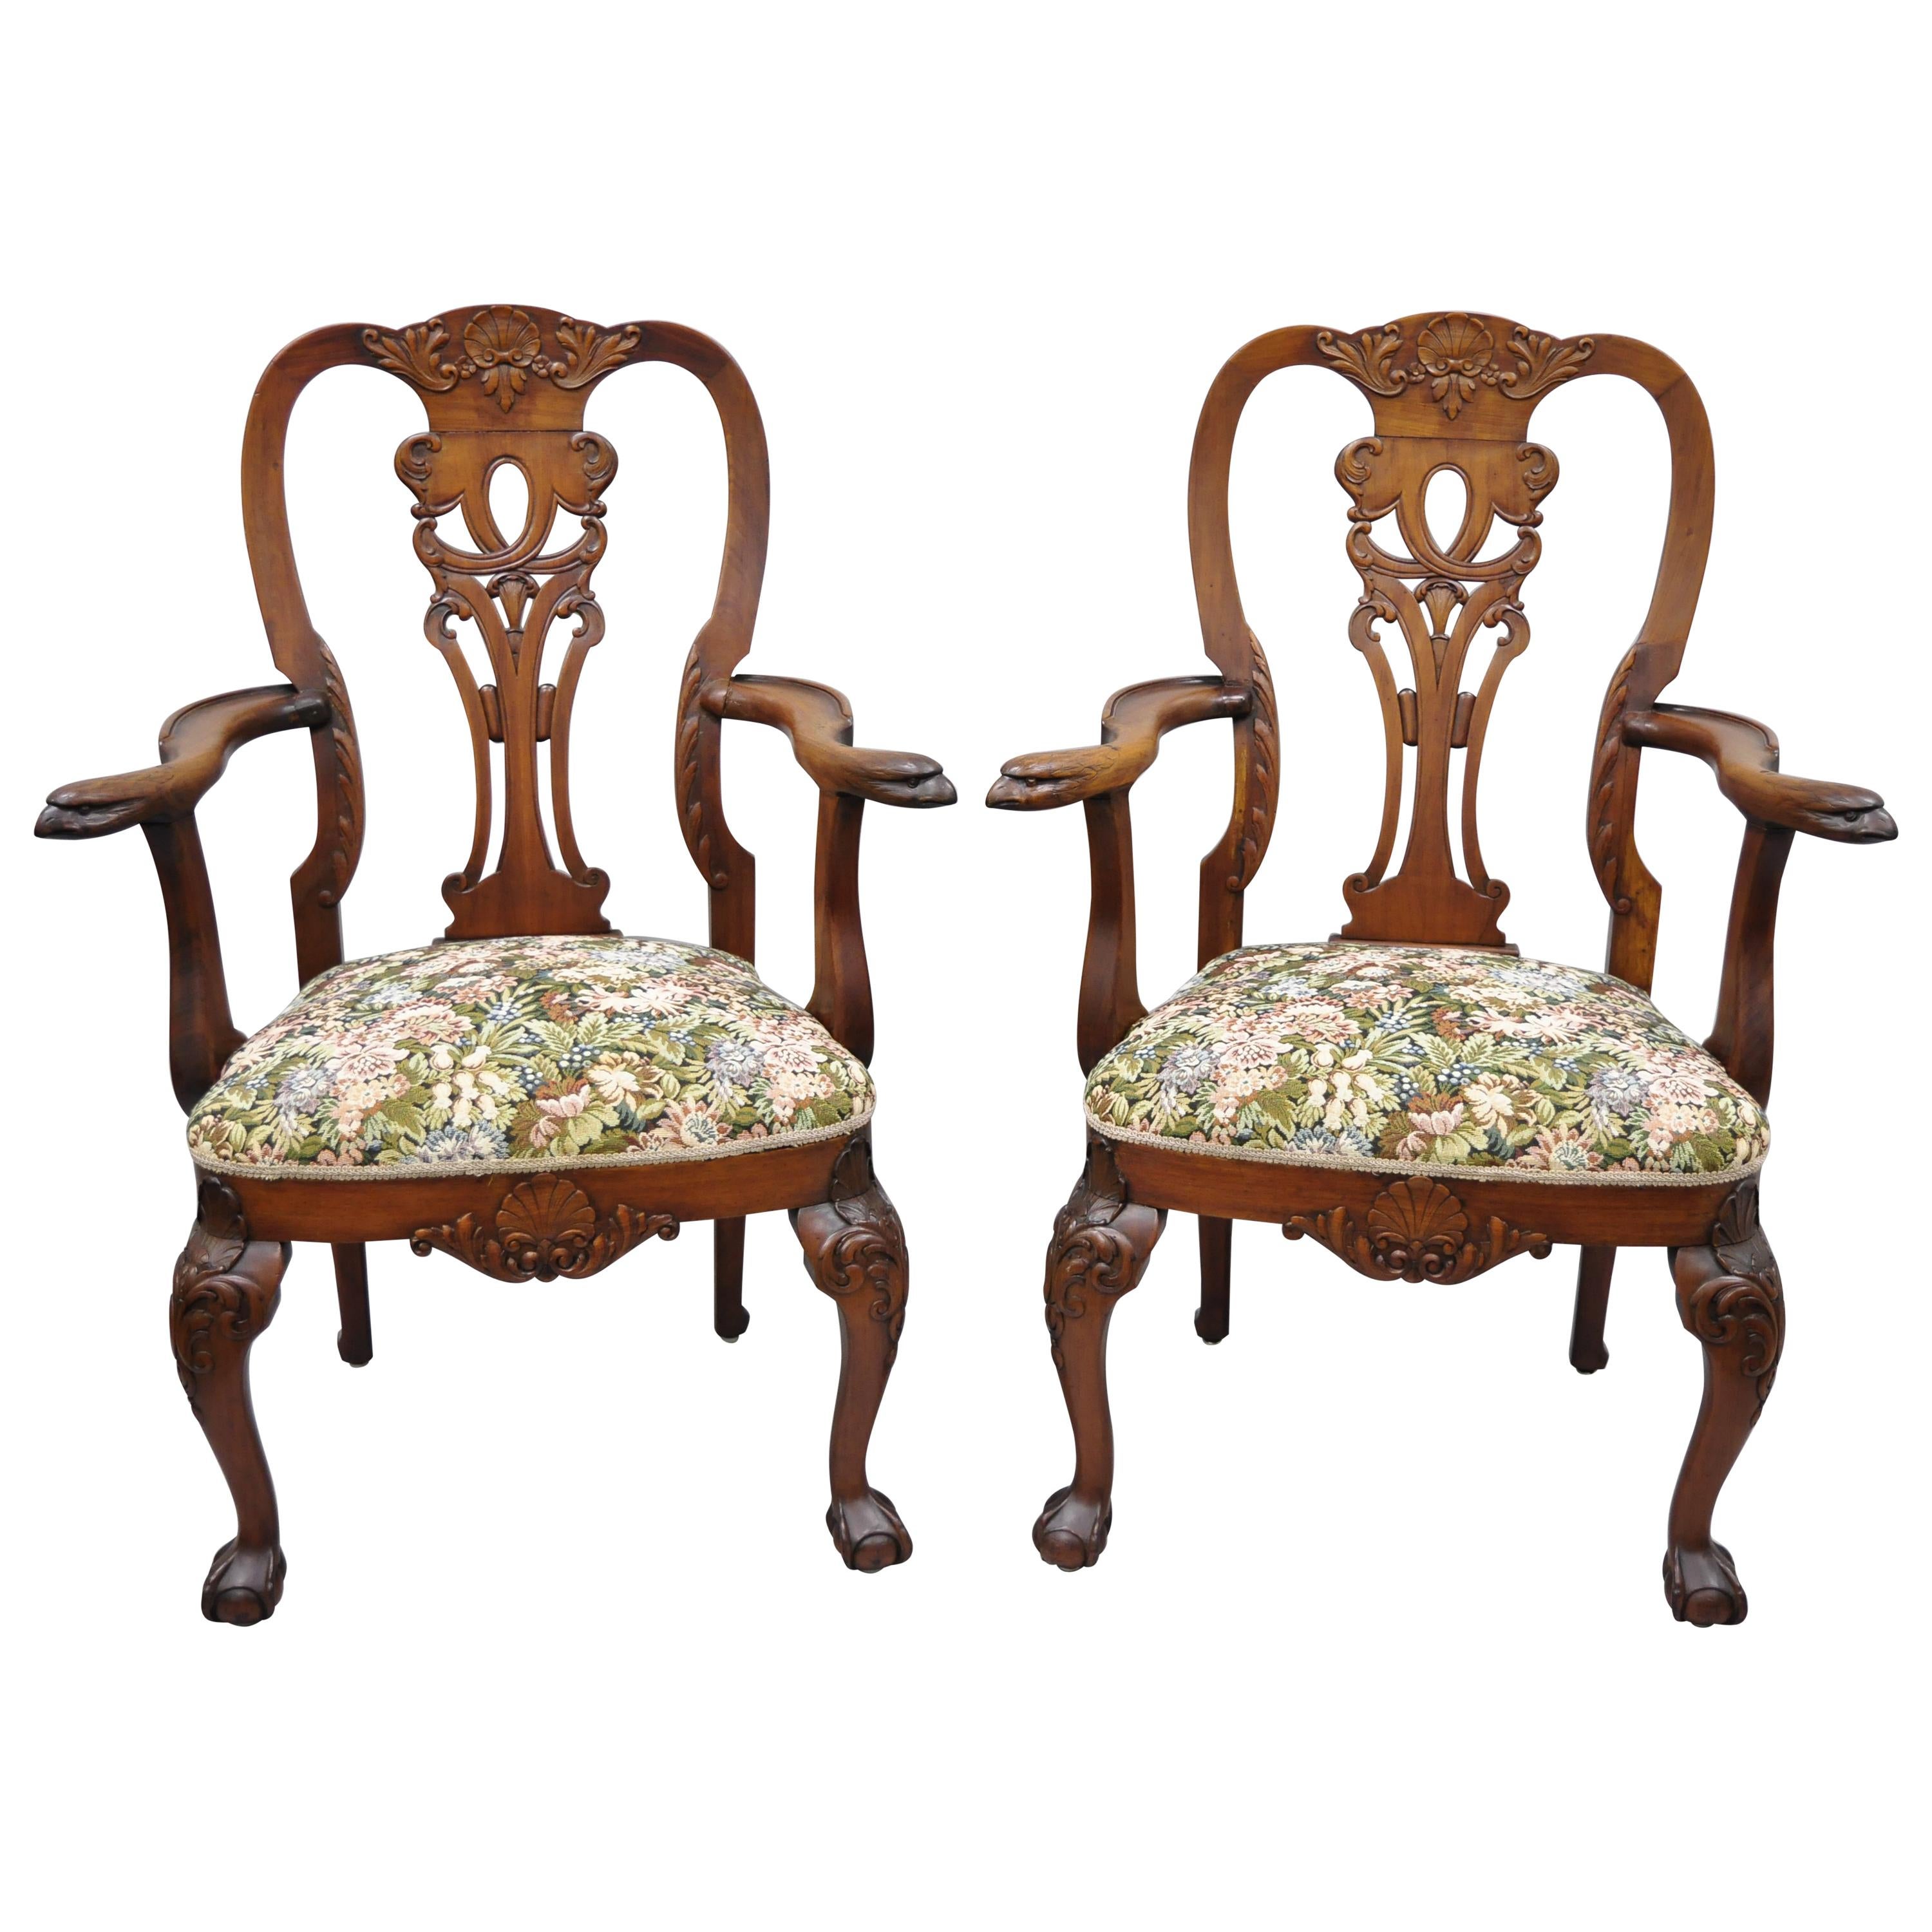 Early 20th Century Mahogany Chippendale Style Armchairs Carved with Eagle Heads For Sale